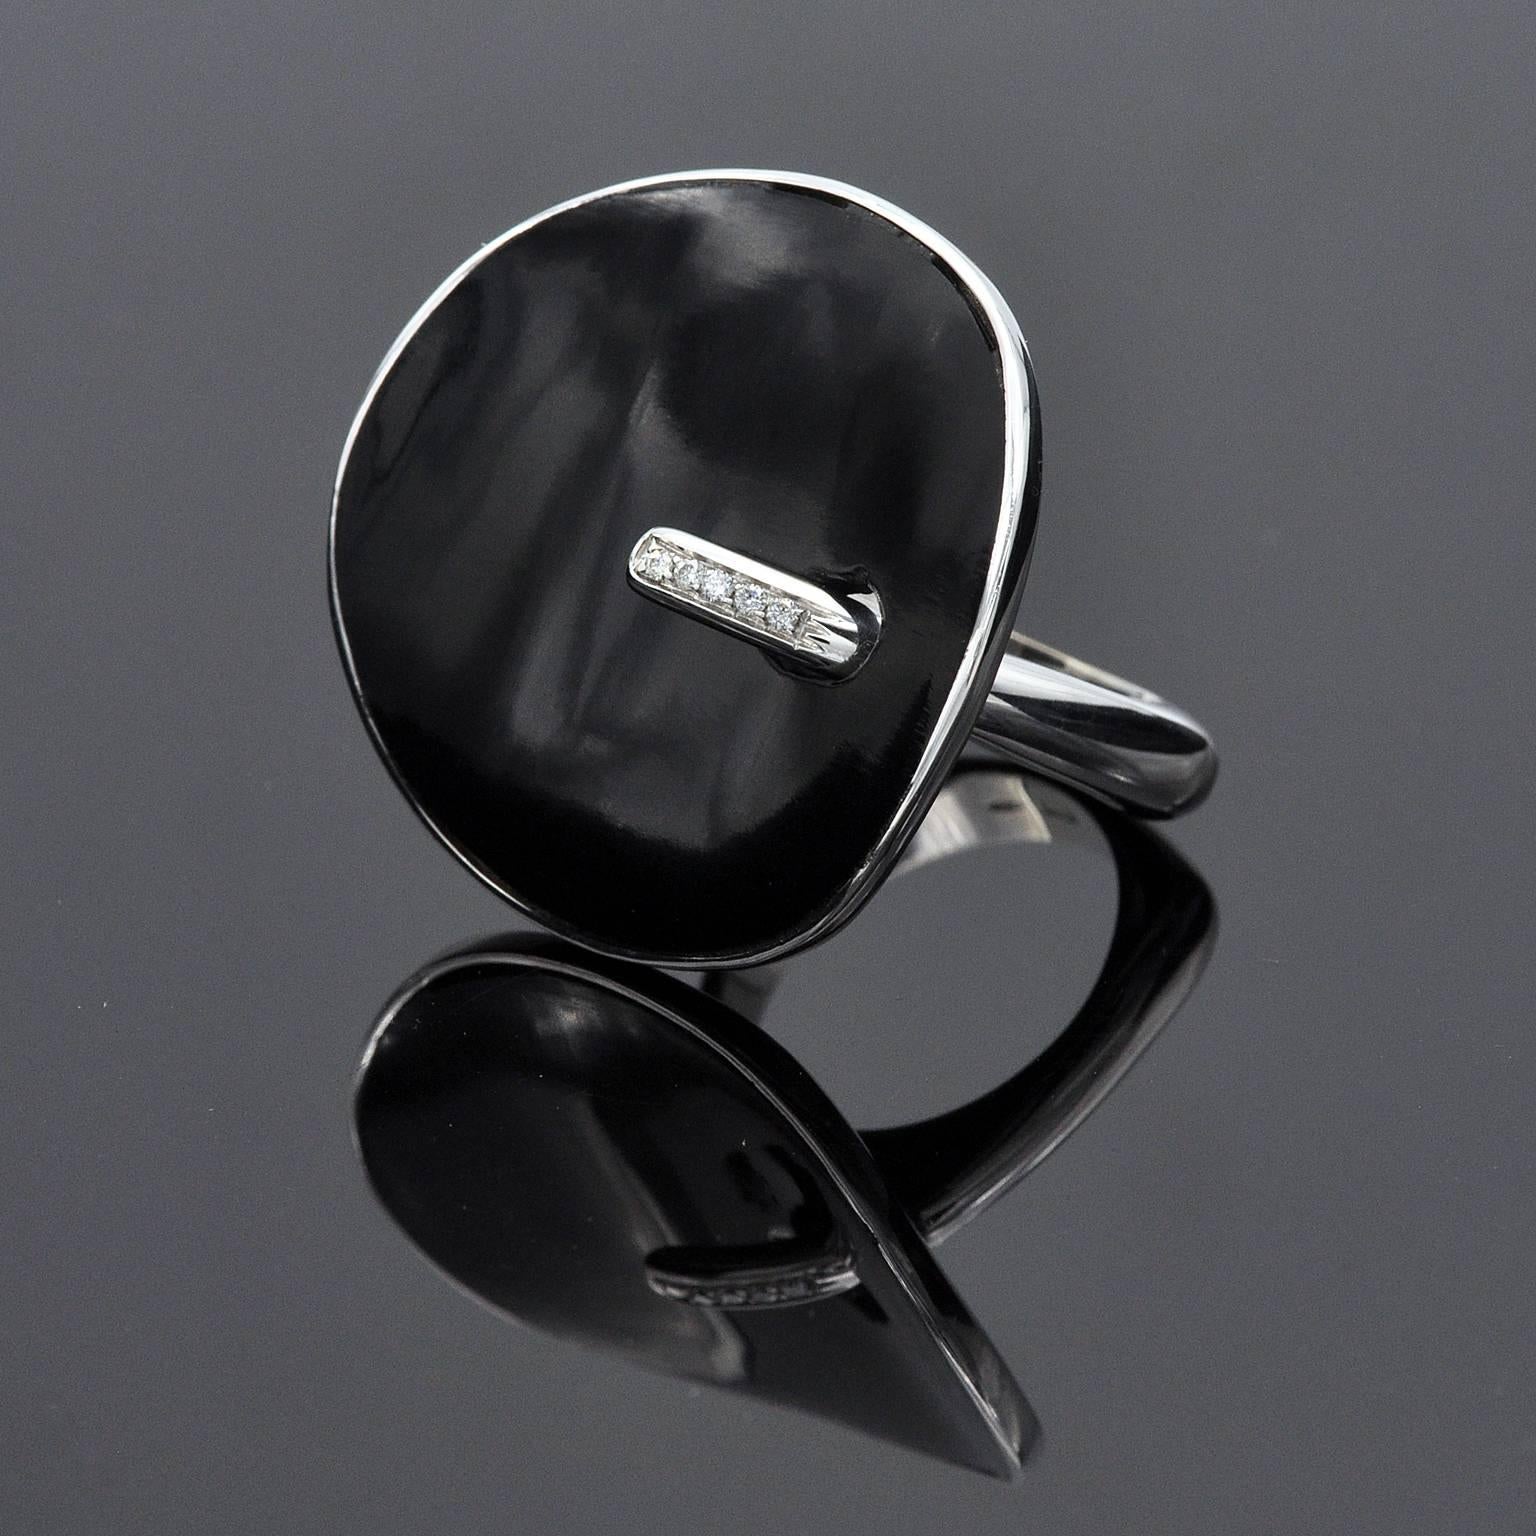 Modern cocktail Ring with a strong contemporary design. A large onyx curved disc on 18 kt white Gold highlighted with white diamonds.